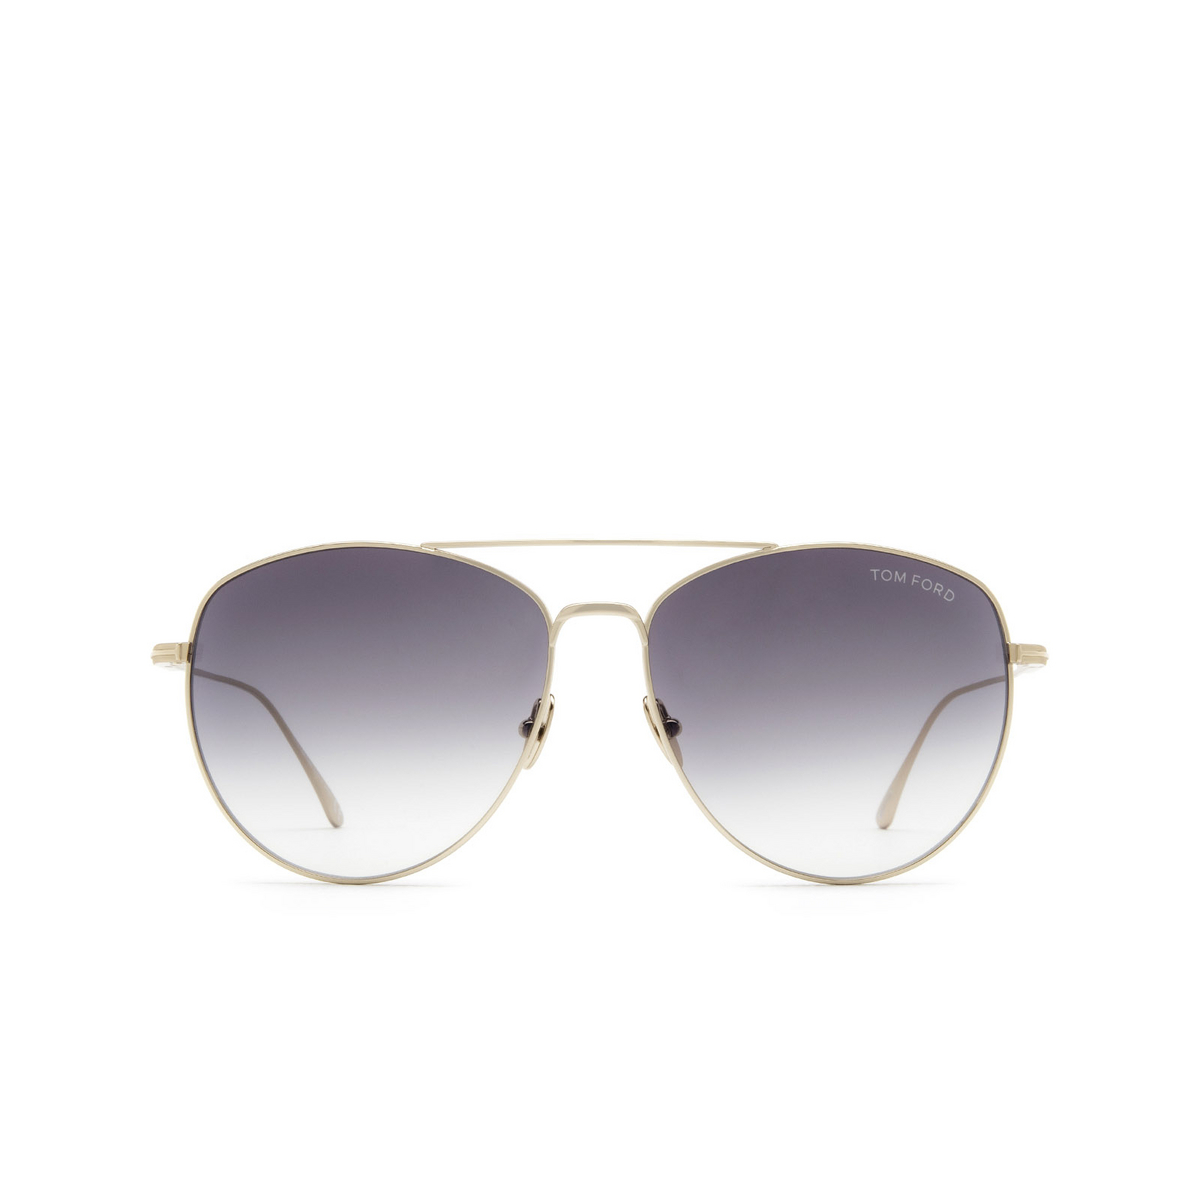 Tom Ford MILLA Sunglasses 28B Rose Gold - front view